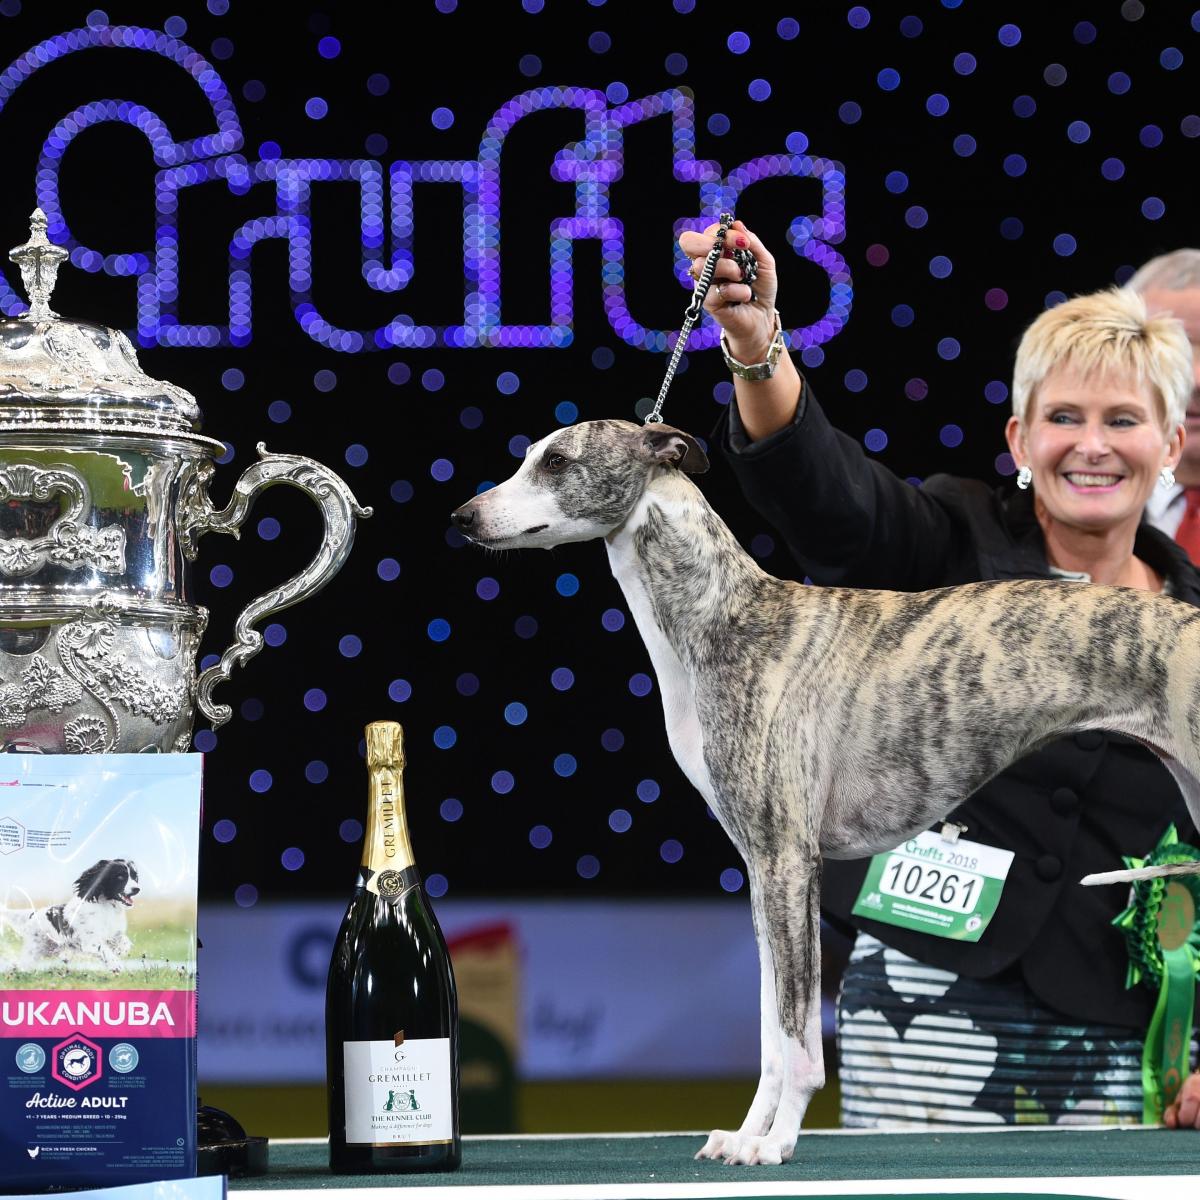 Crufts Dog Show Results 2018: Sunday Winners, Top Photos and Reaction | Bleacher ...